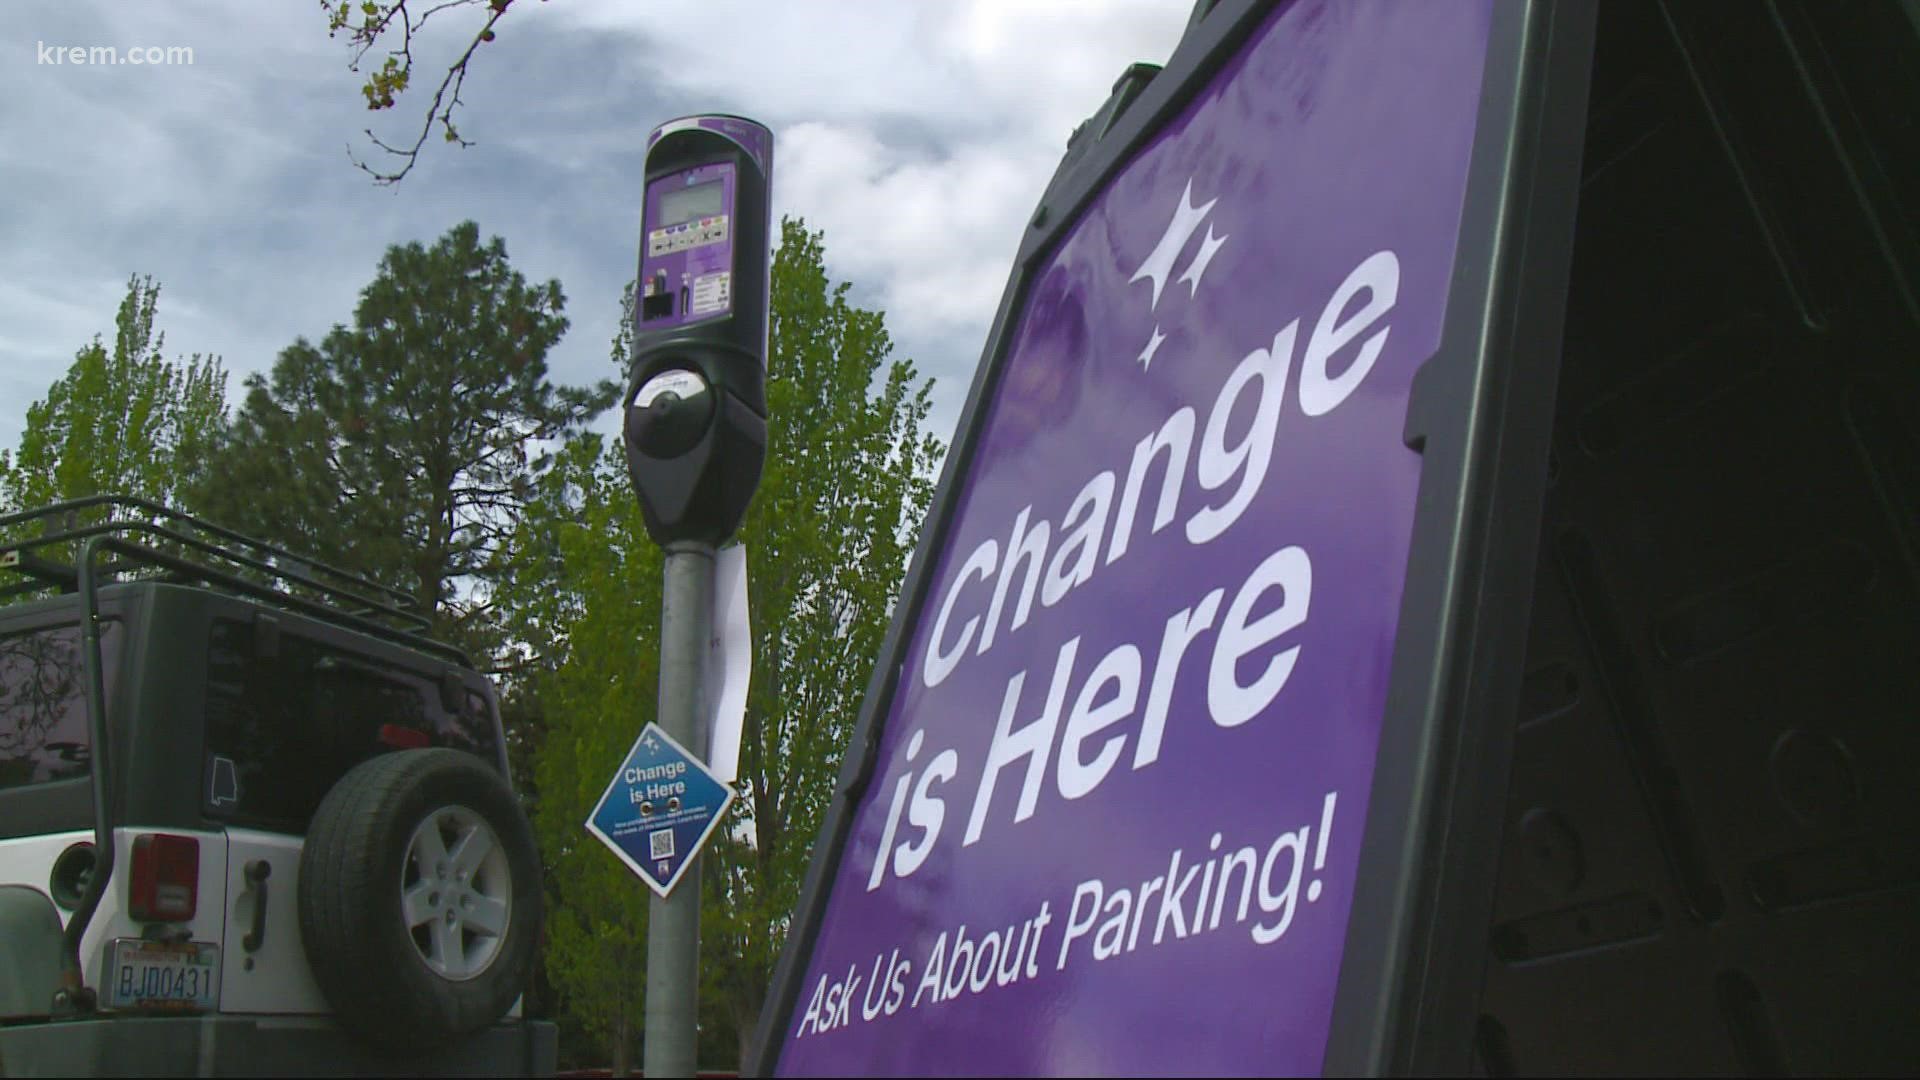 Starting Tuesday the city of Spokane will start installing new single and dual space on-street parking meters in the downtown area.